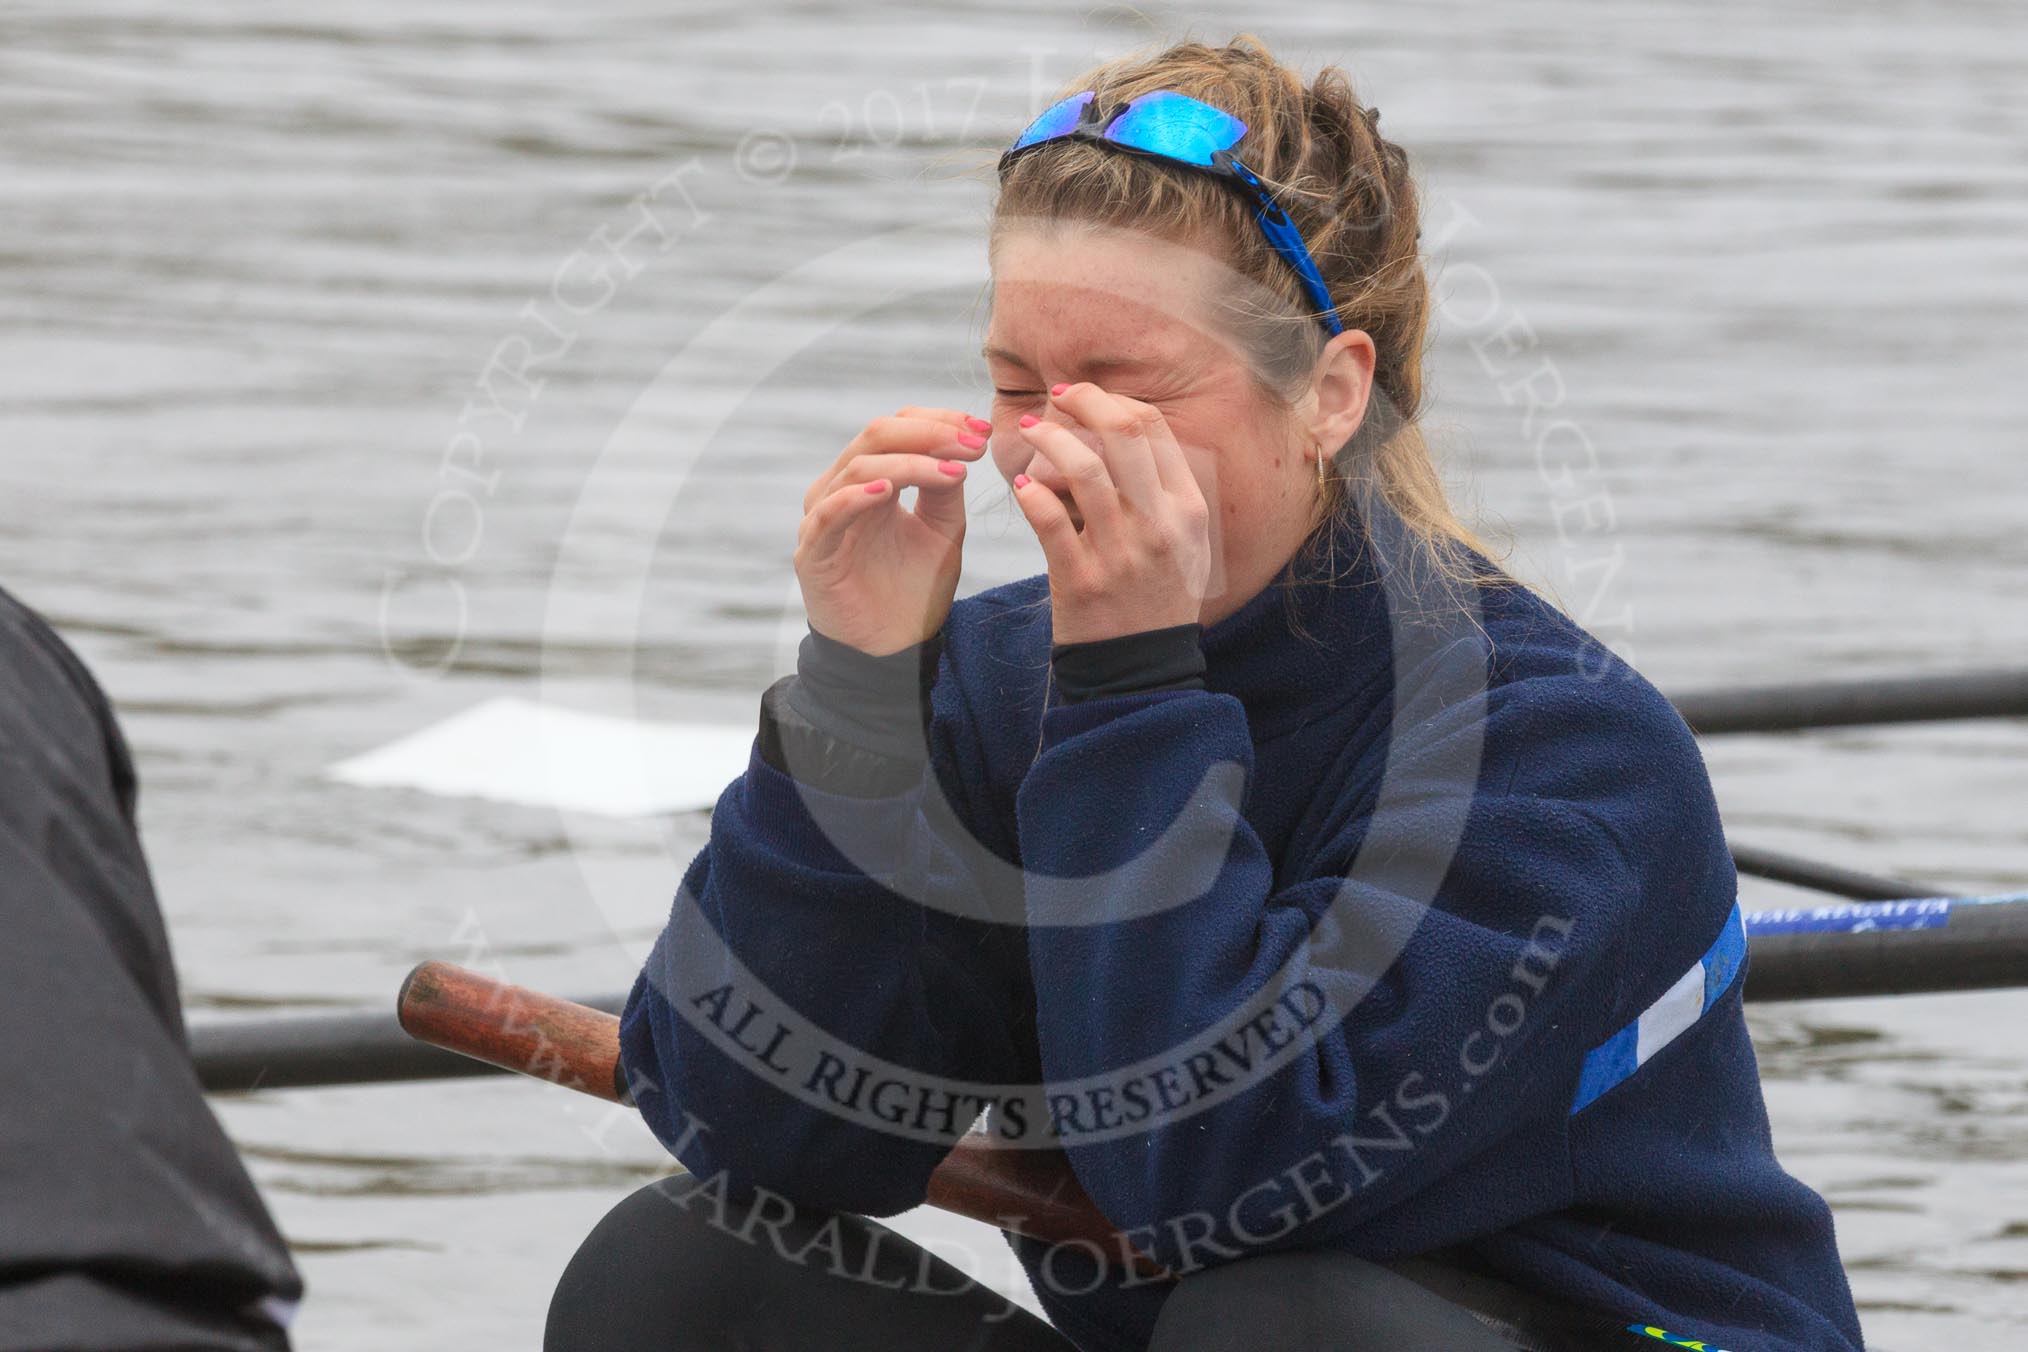 The Women's Boat Race season 2018 - fixture OUWBC vs. Molesey BC: Molesey's 7 seat Emma McDonald.
River Thames between Putney Bridge and Mortlake,
London SW15,

United Kingdom,
on 04 March 2018 at 13:09, image #15